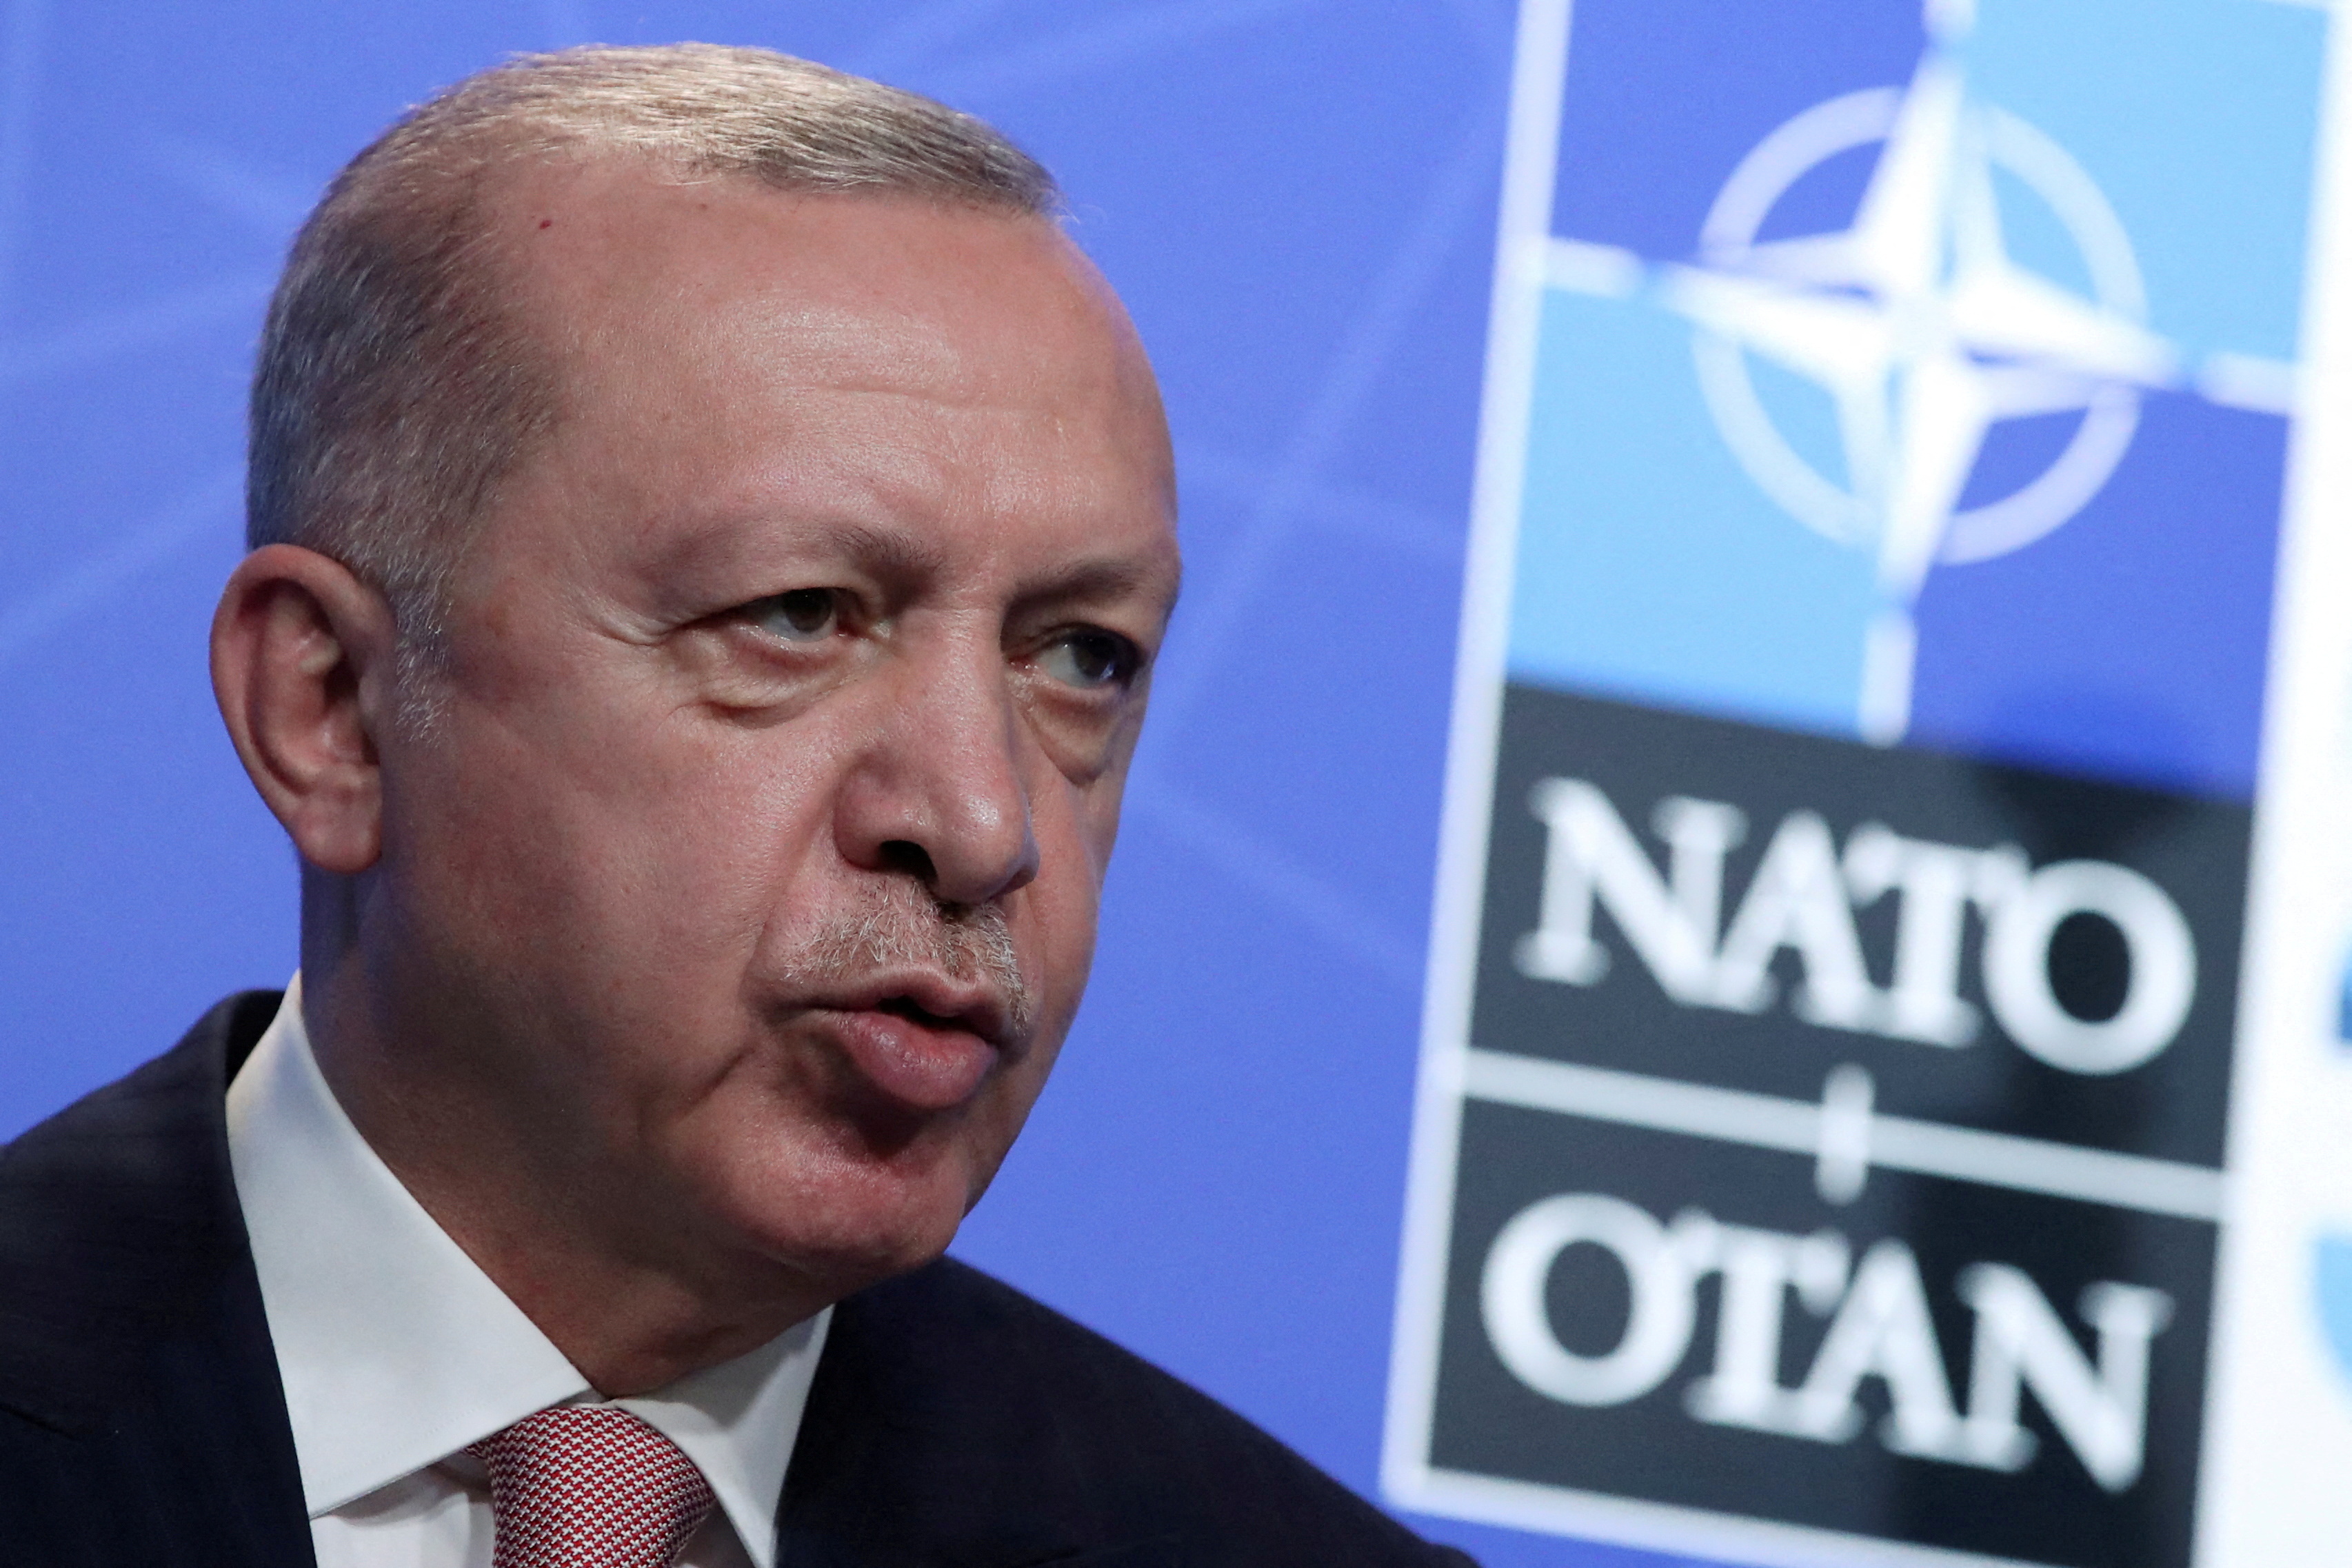 FILE PHOTO: Turkey's President Tayyip Erdogan holds a news conference during the NATO summit at the Alliance's headquarters in Brussels, Belgium June 14, 2021. REUTERS/Yves Herman/Pool/File Photo